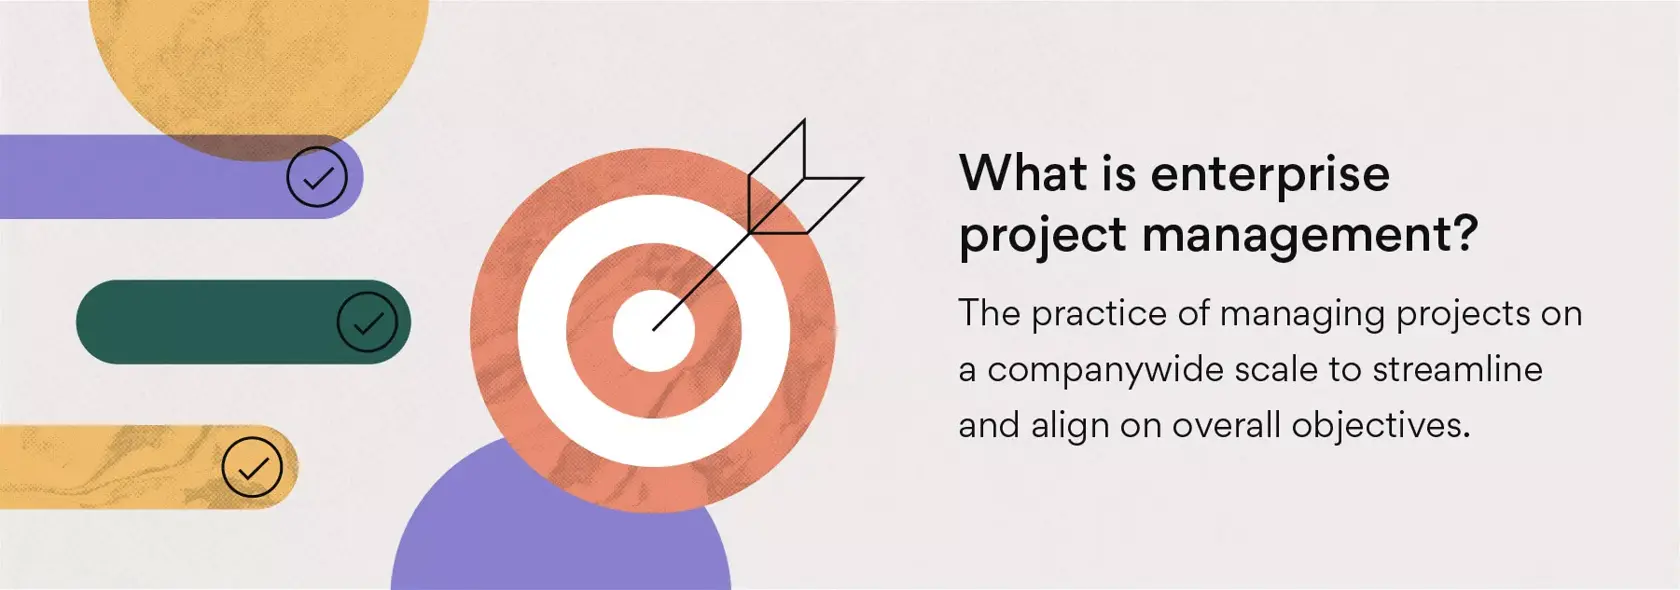 [inline illustration] What is enterprise project management? (infographic)